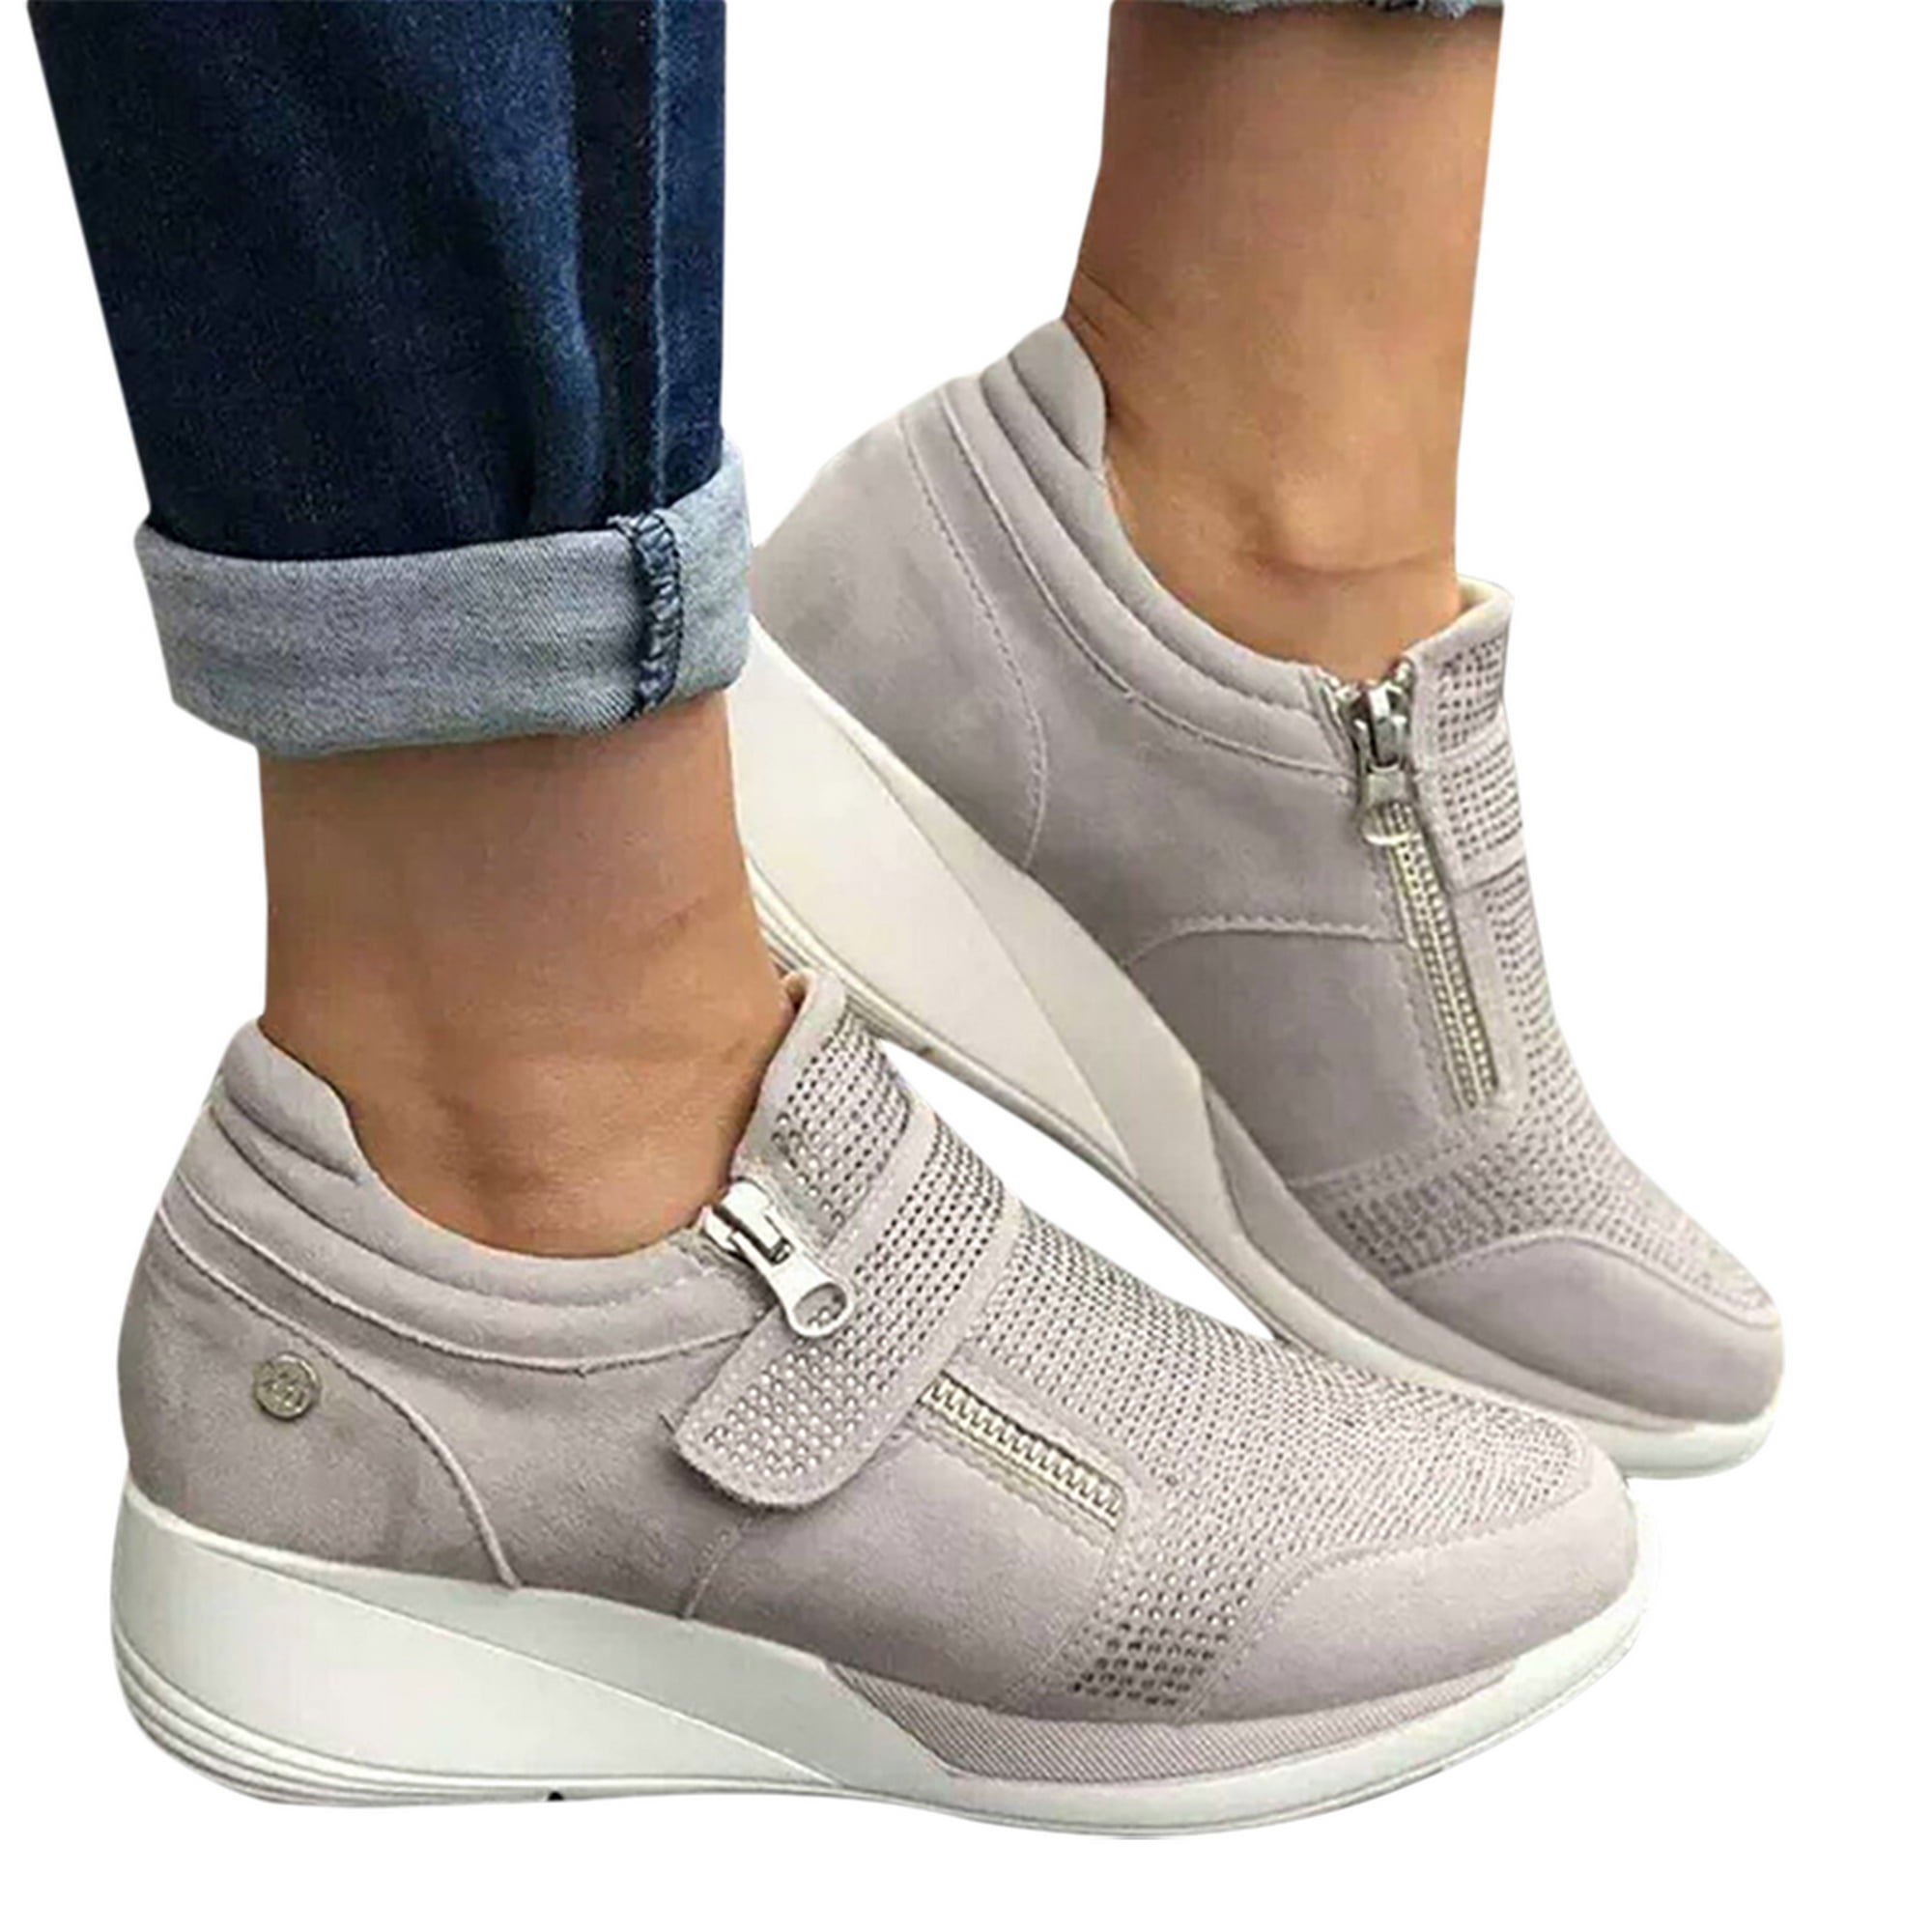 Mesh Women Casual Shoes Comfortable Platform Shoes Woman Sneakers Trainers Chaussure,Gray,35